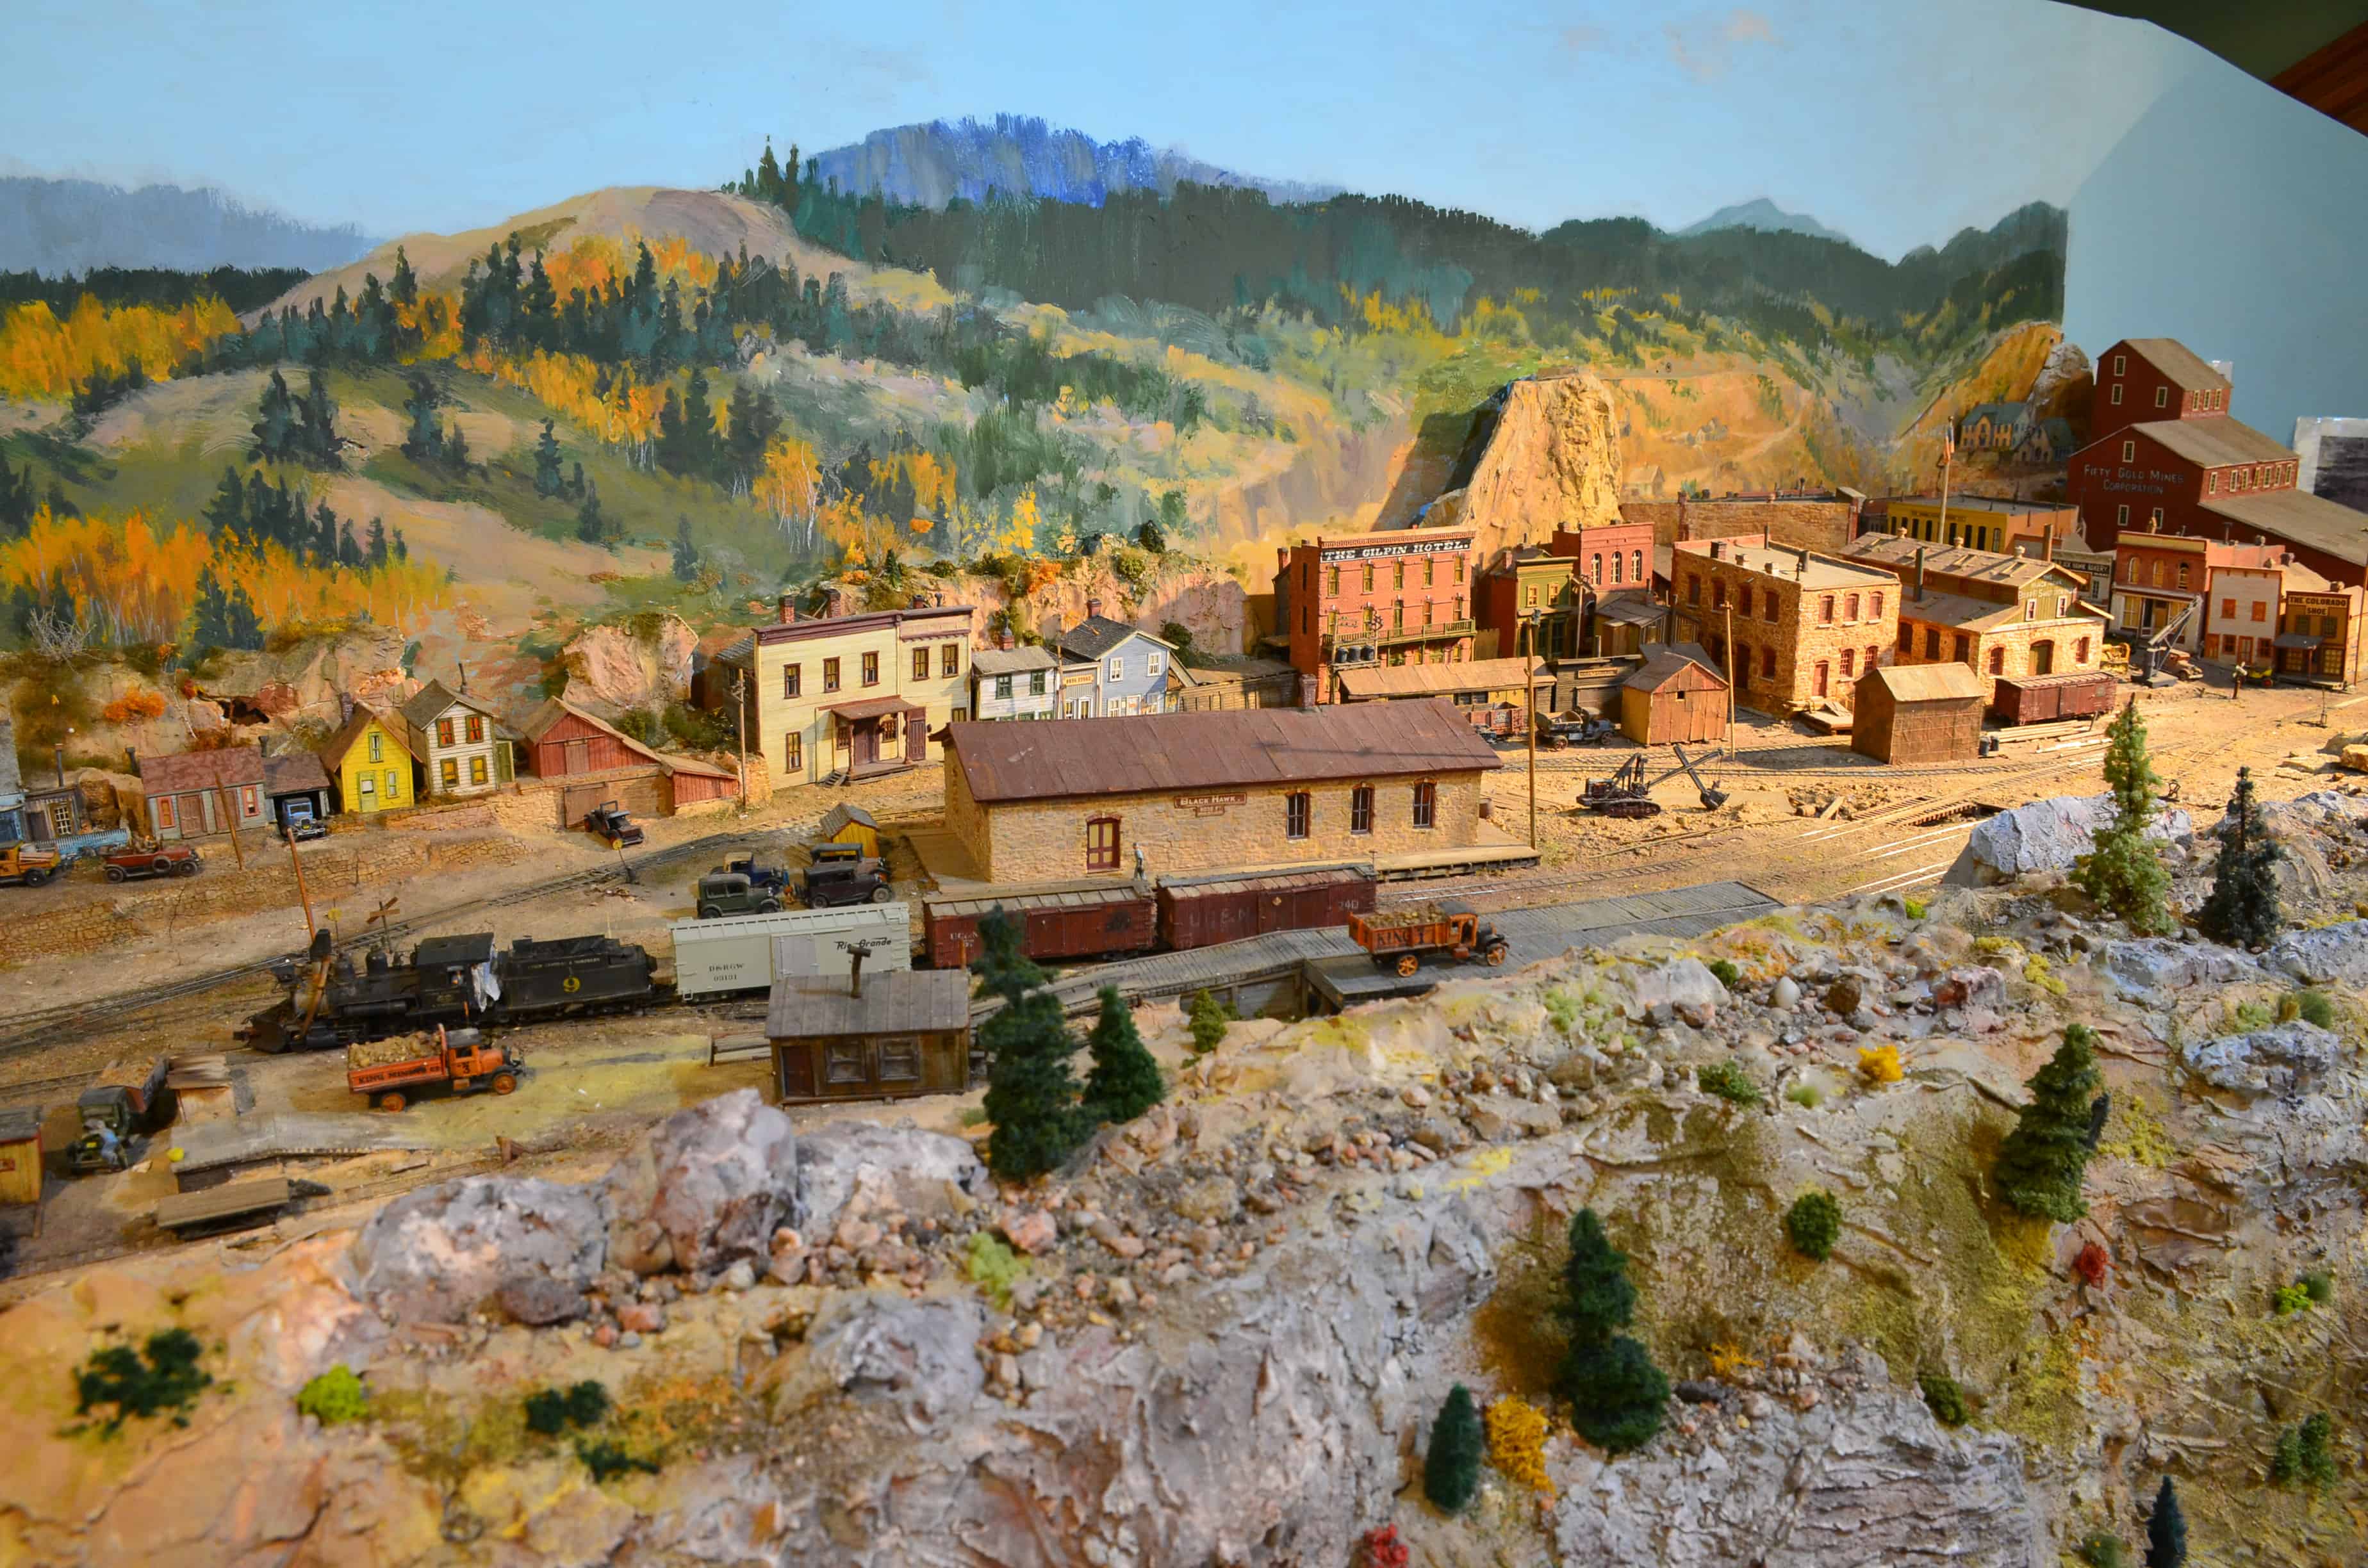 Model railroad at the Cheyenne Depot Museum in Wyoming